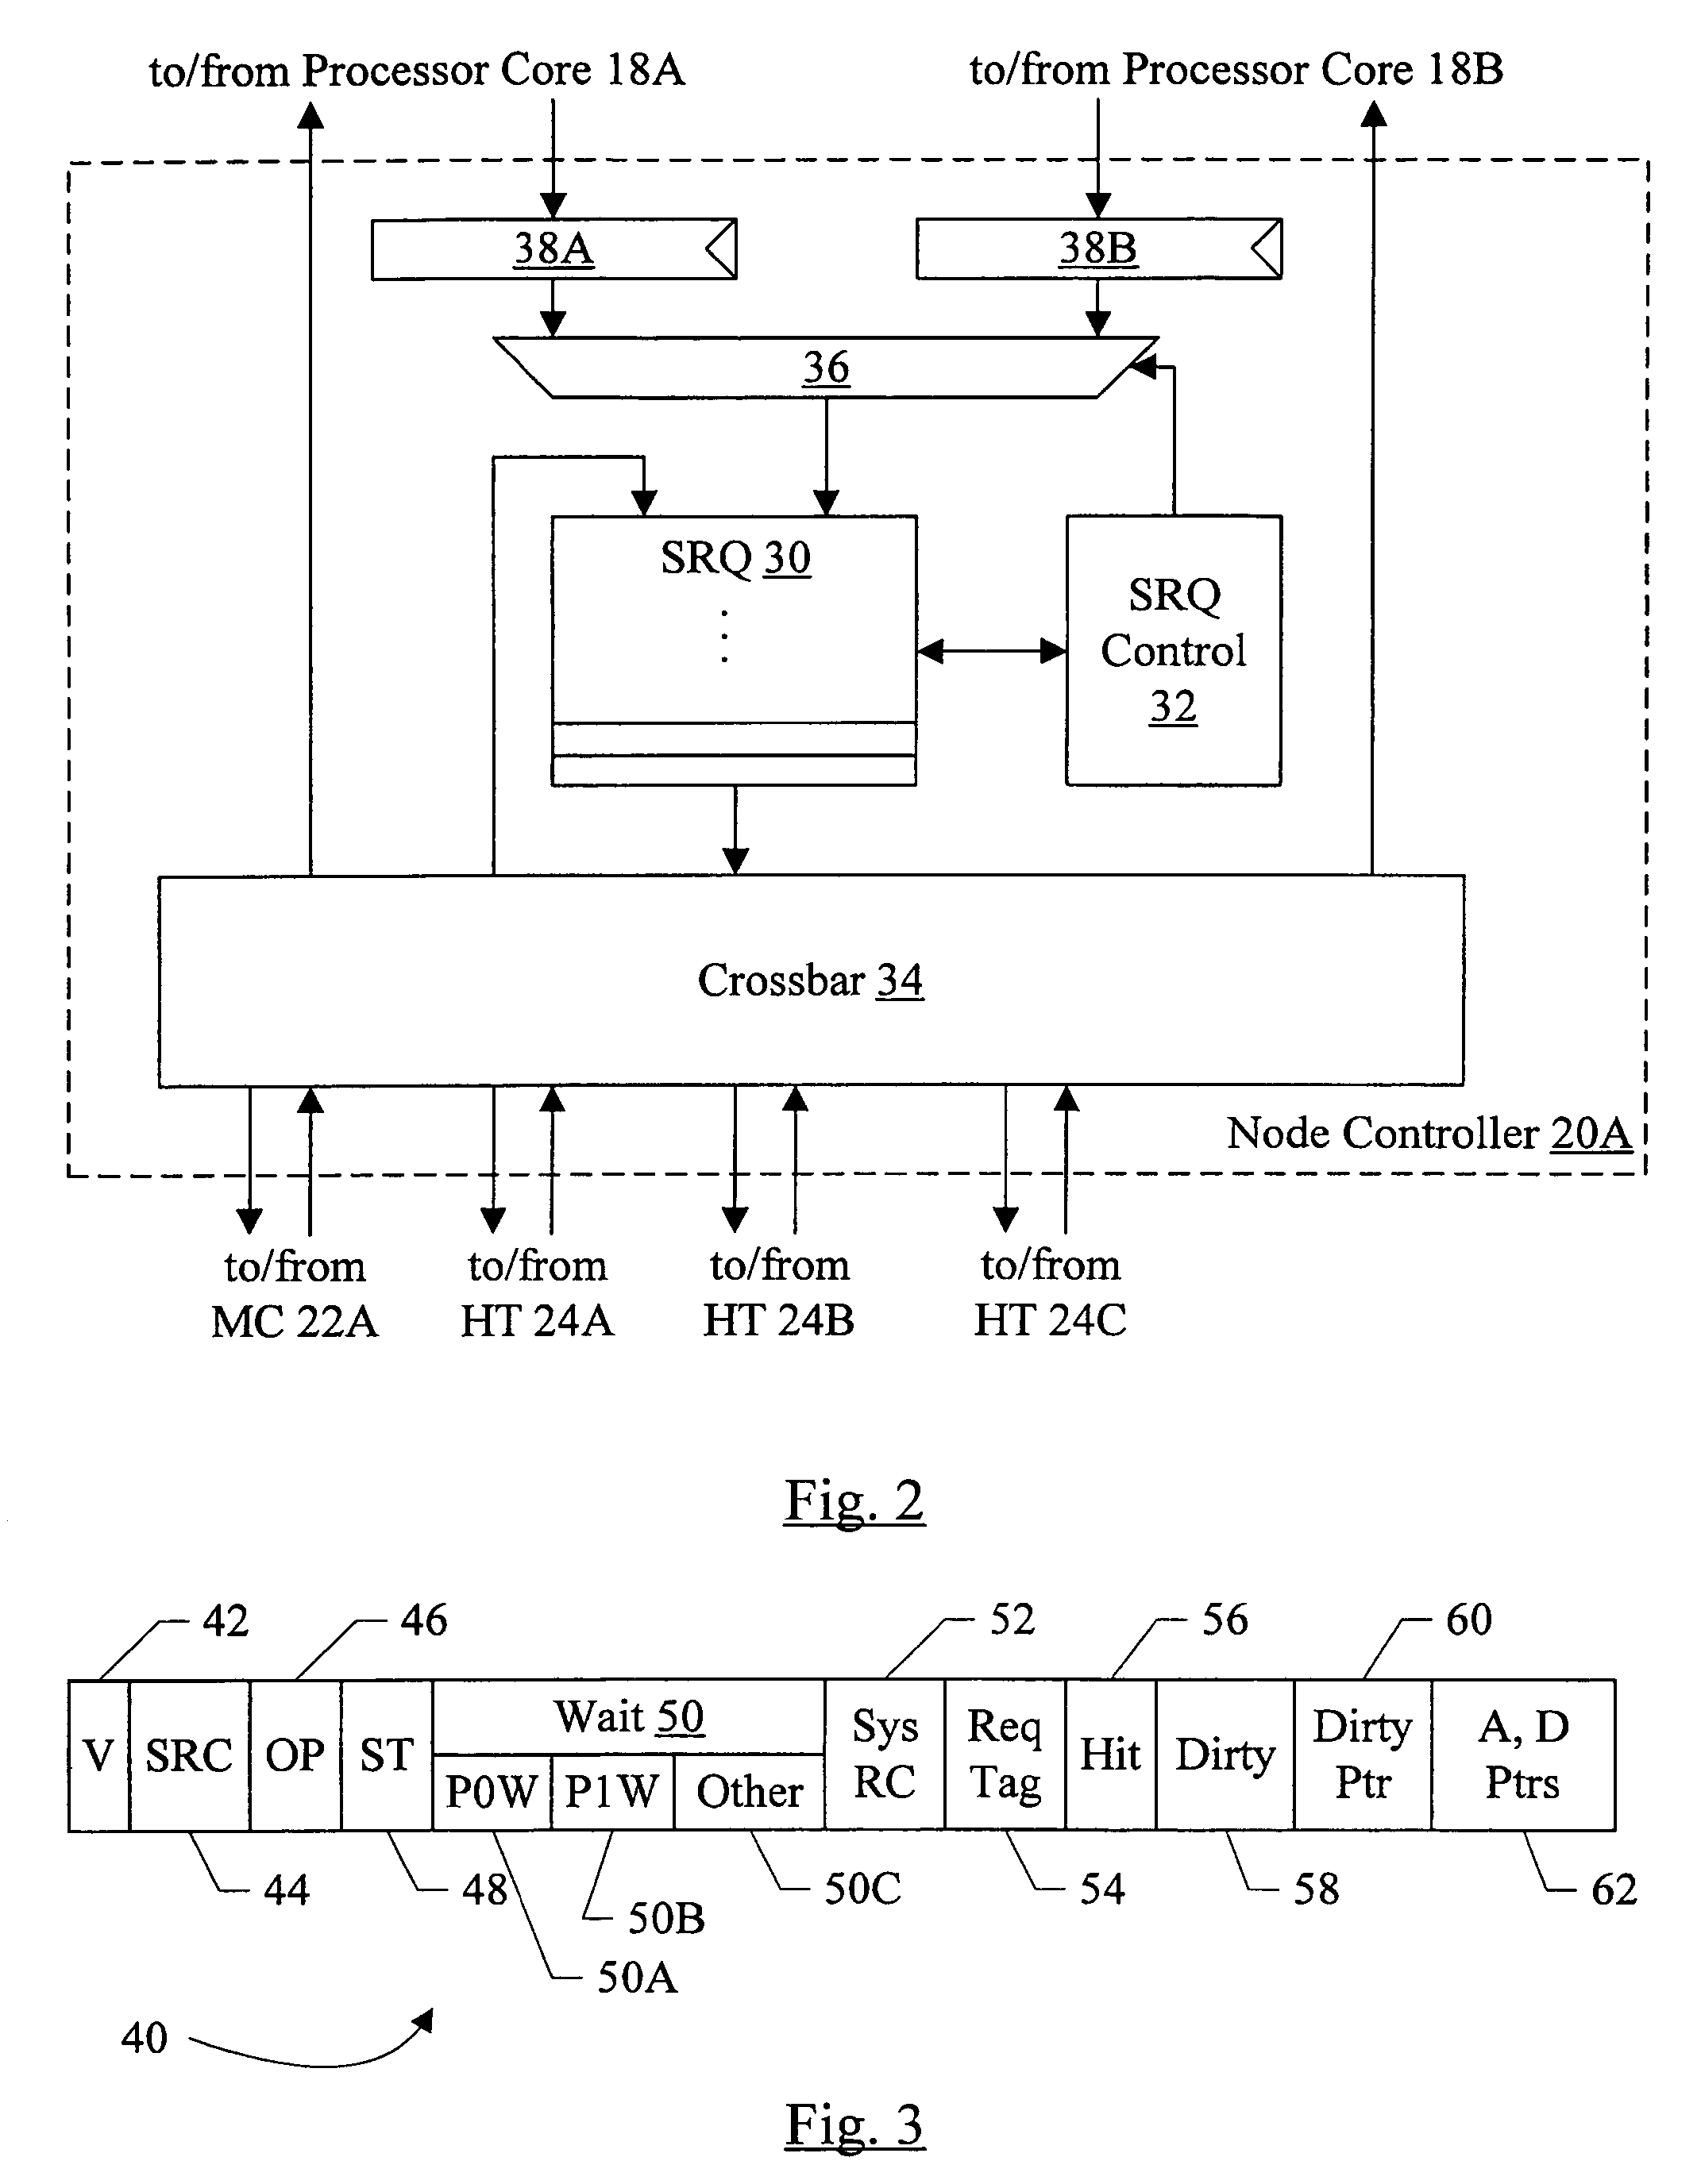 Combined system responses in a chip multiprocessor